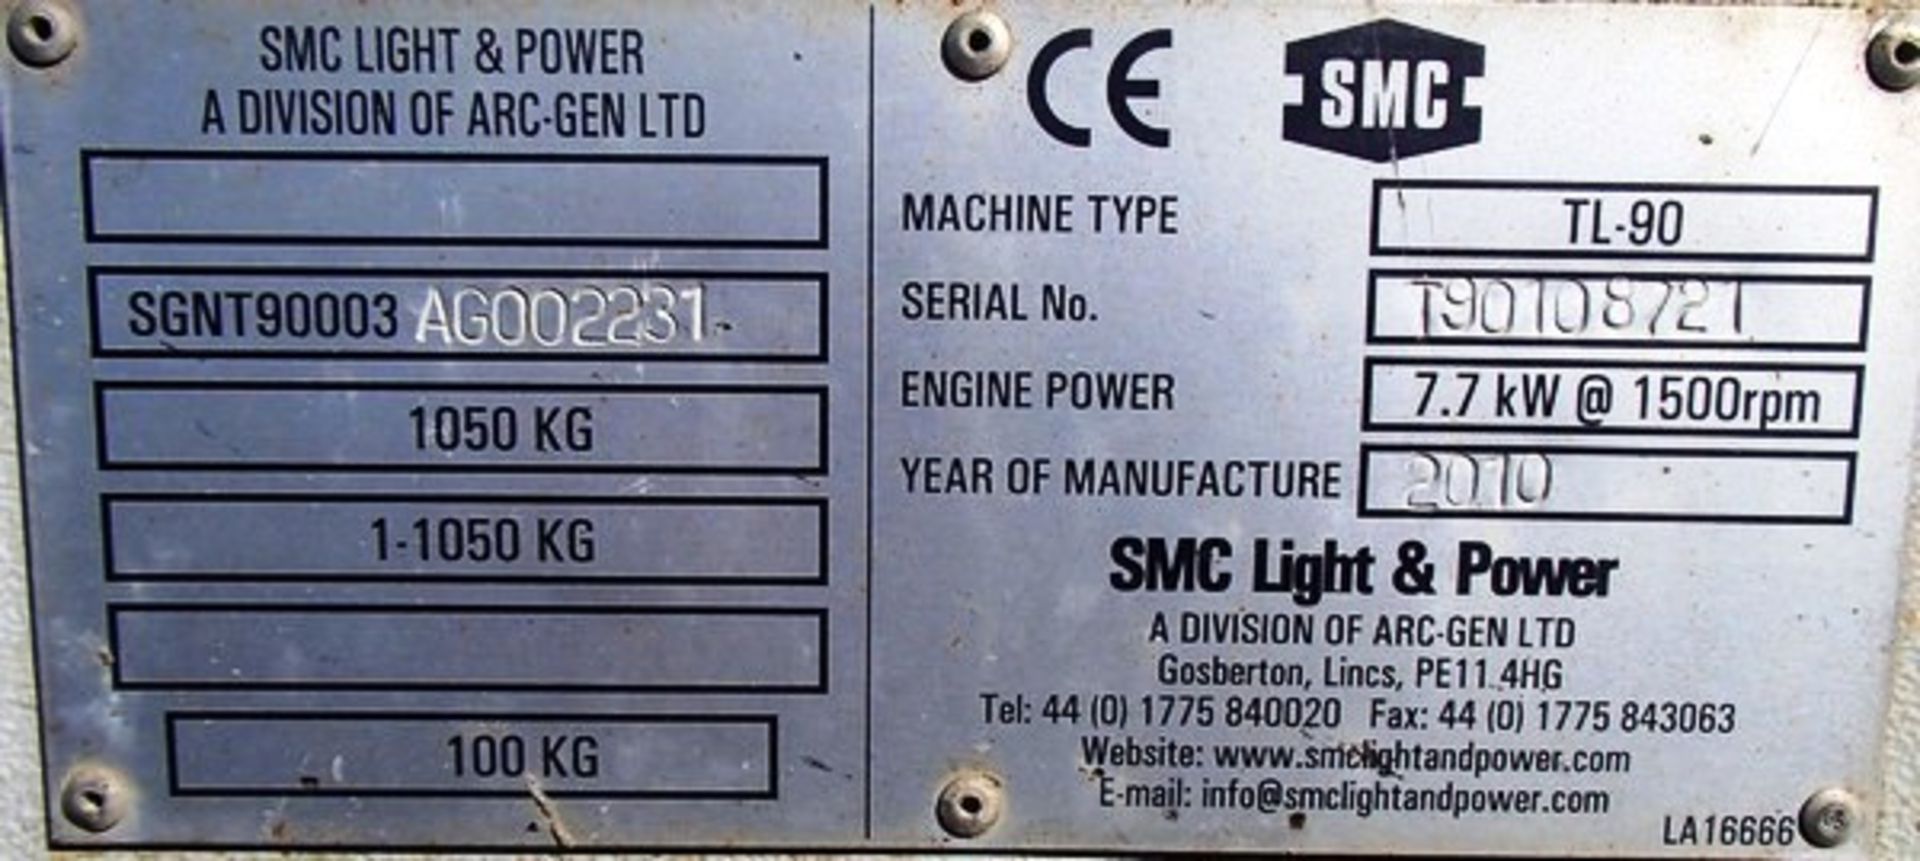 2010 SMC TL-90 SN t90108721 TOWABLE TOWER LIGHTS. ENGINE POWR 7.7KW@1500RPM. 932 HRS - Image 6 of 6